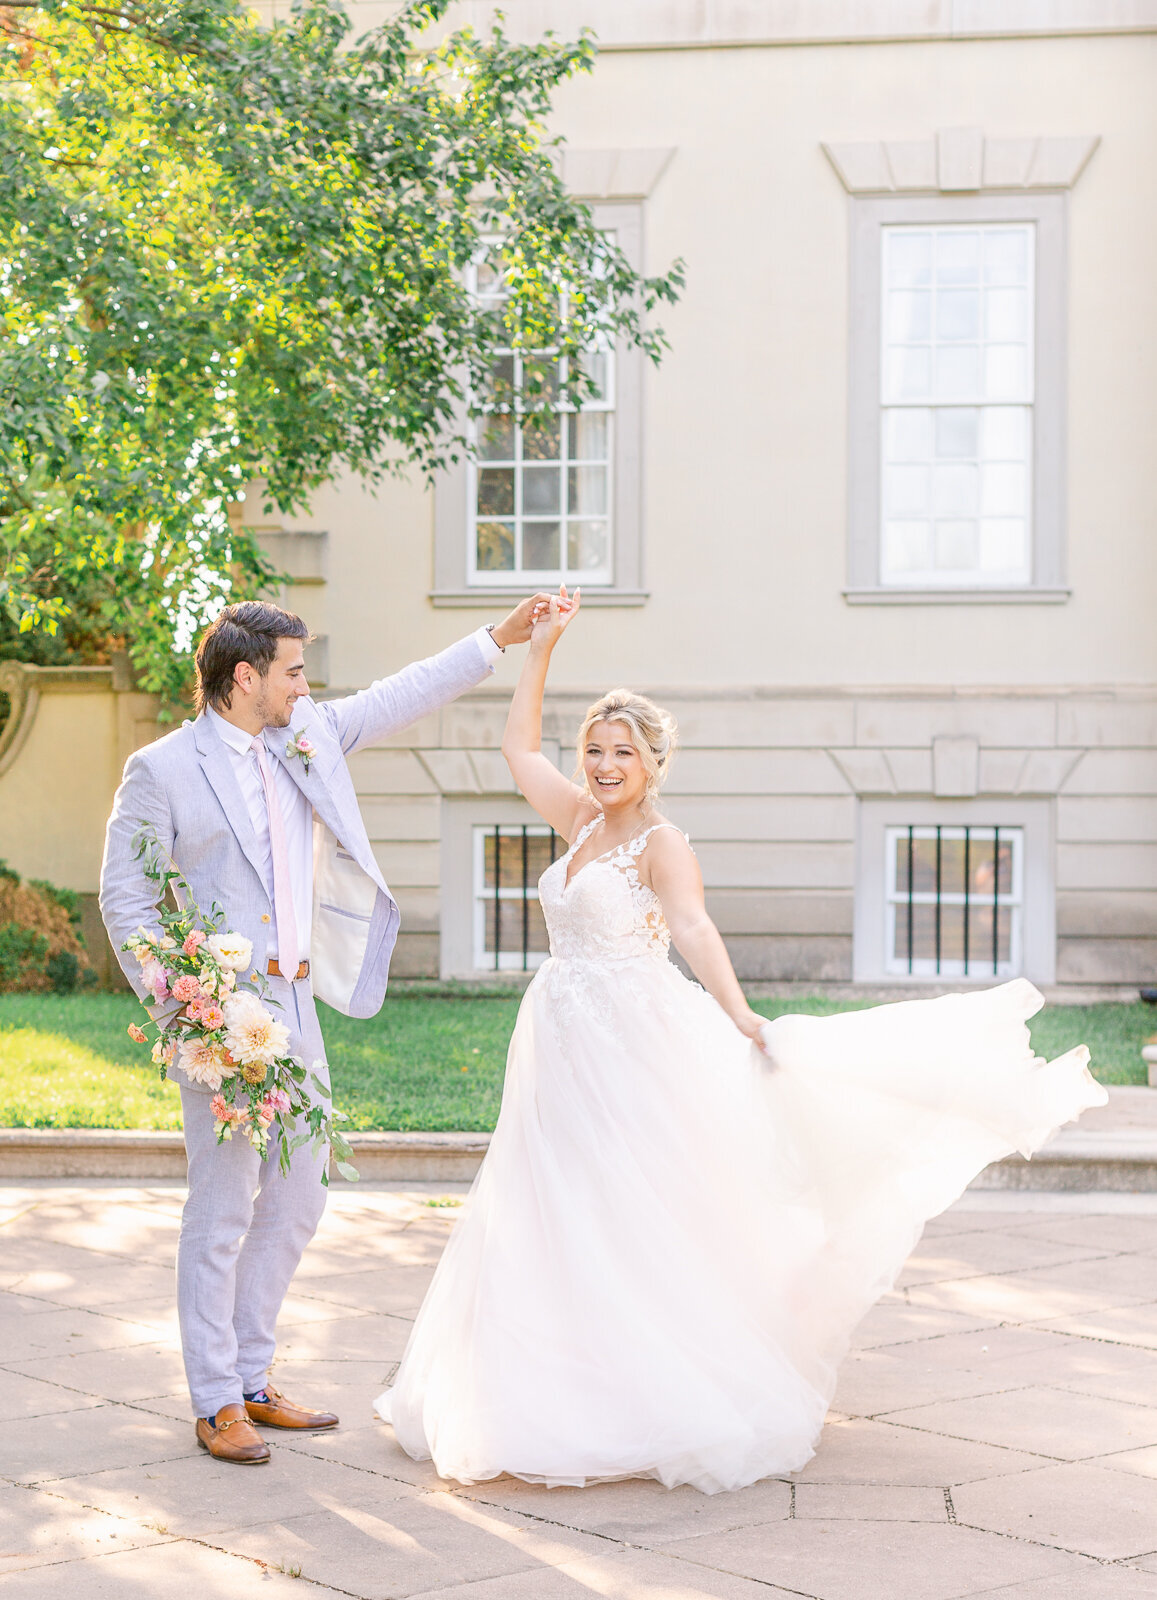 Groom twirling bride in front of Great Marsh Estate in Bealeton, Virginia in the summer. Captured by Bethany Aubre Photography.